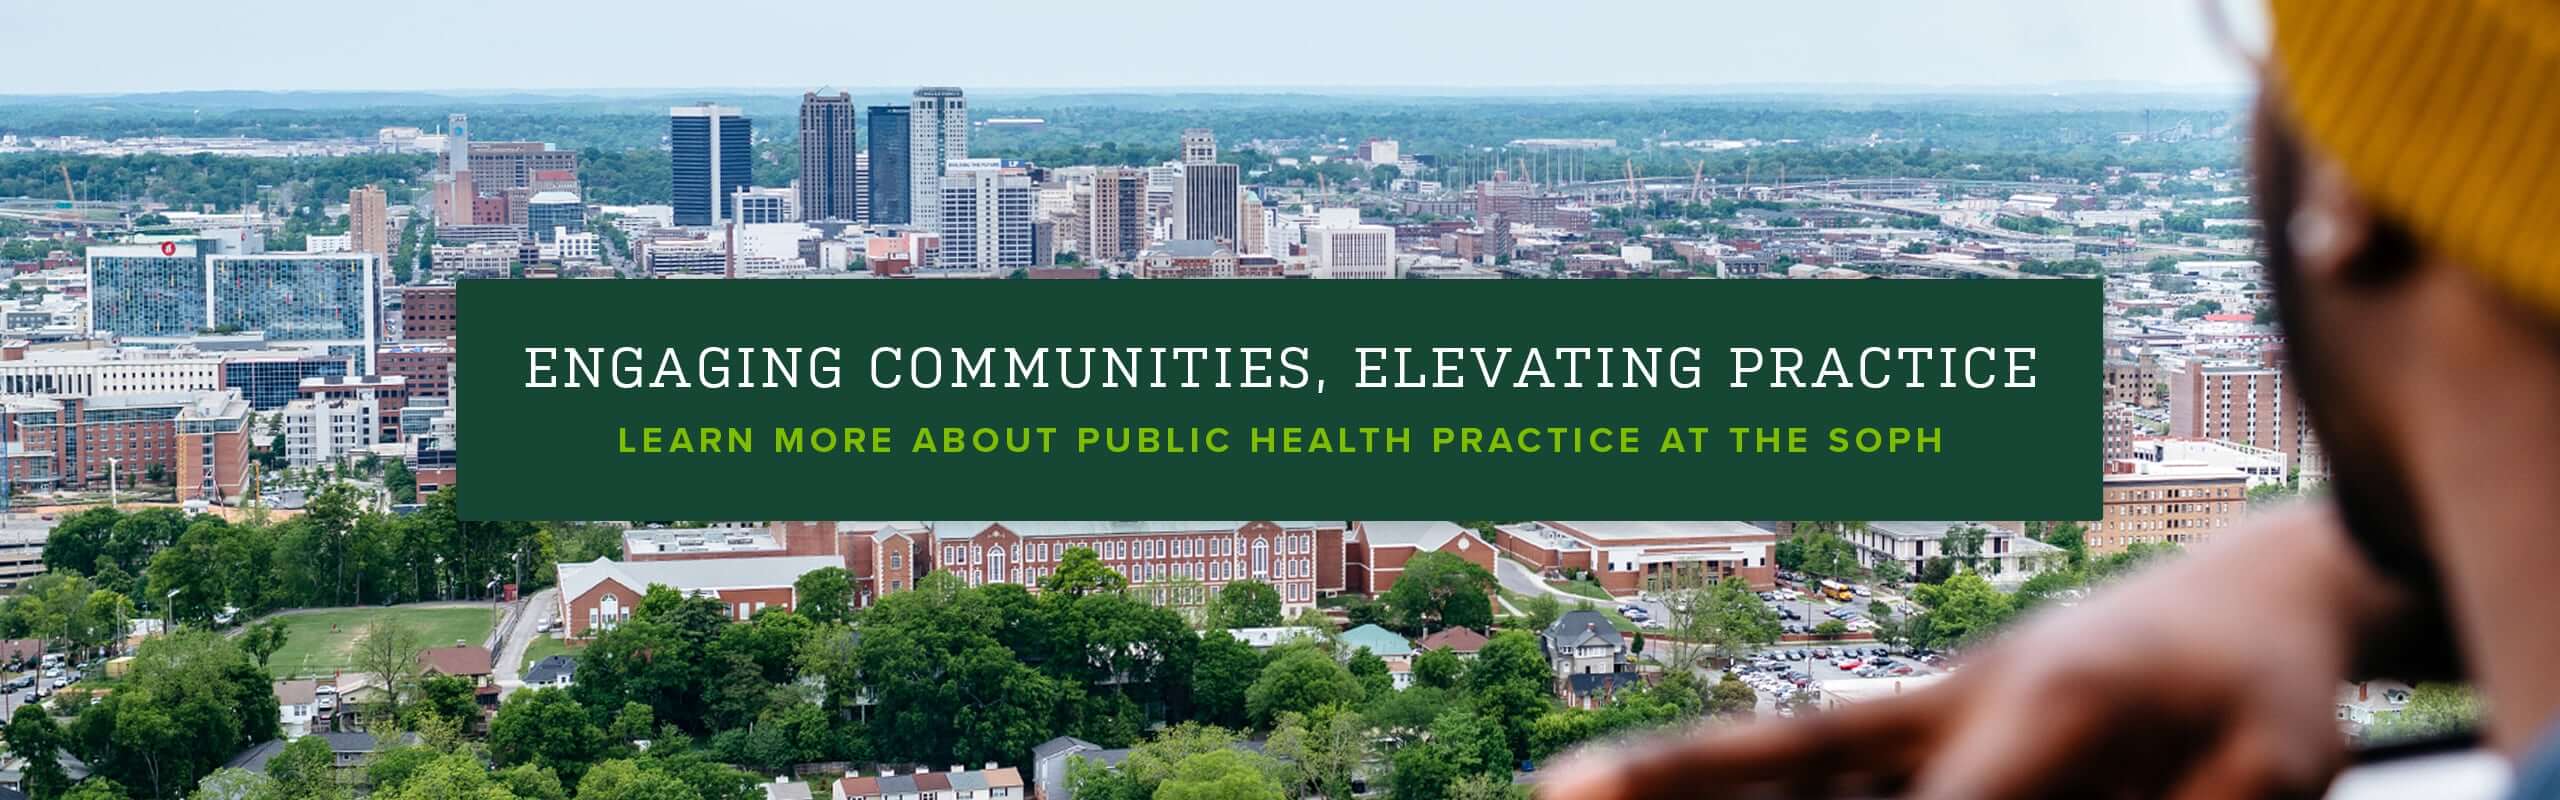 Engaging Communities, Elevating Practice: Learn more about public health practice at the SOPH.